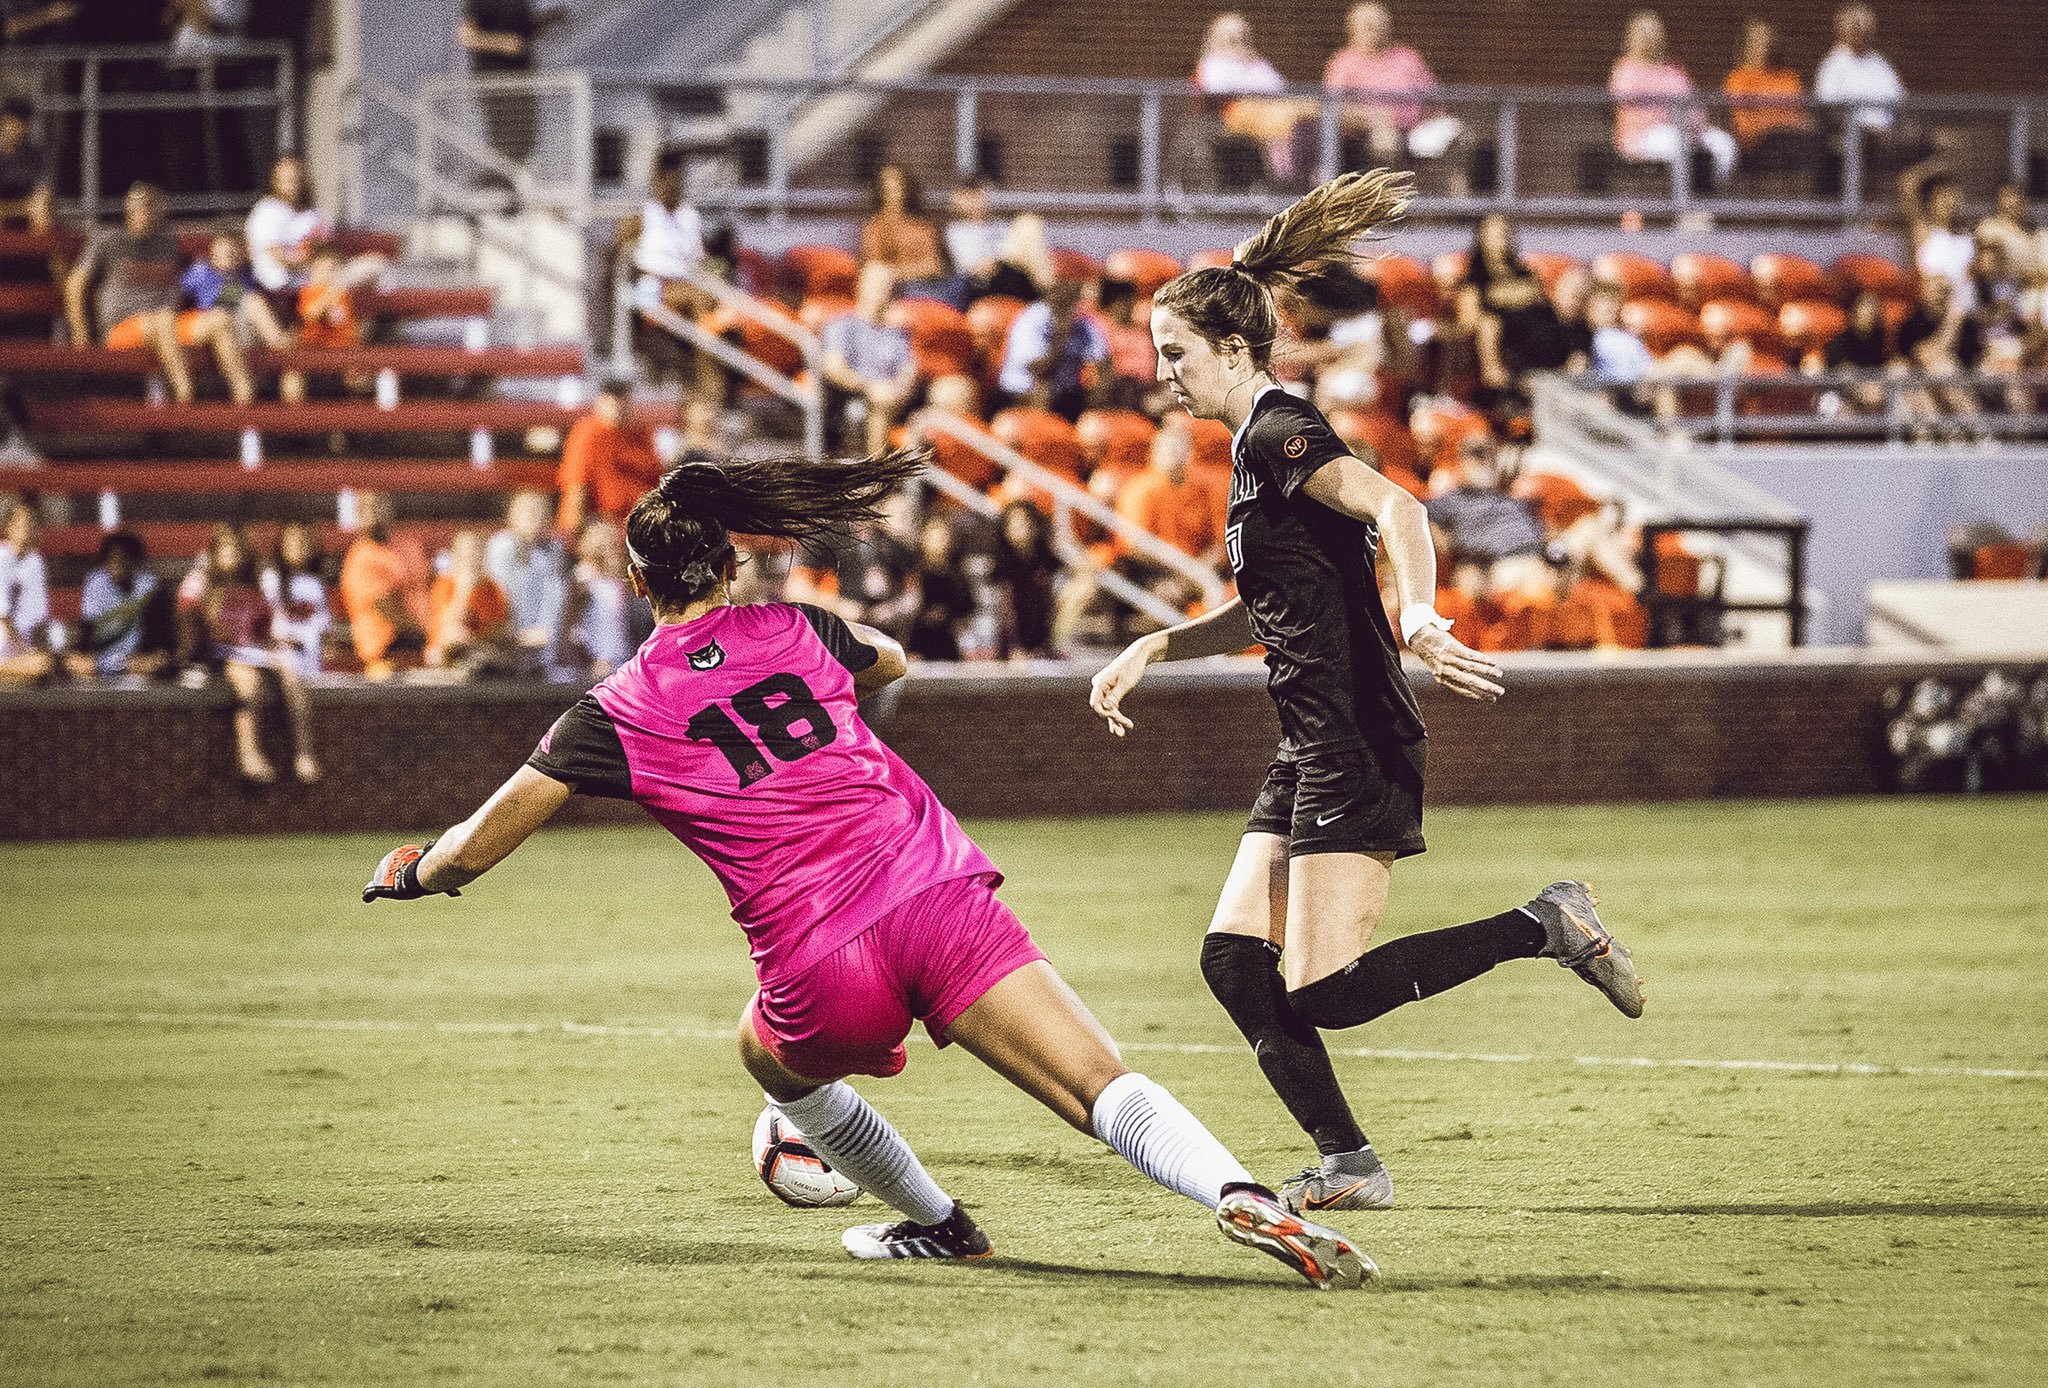 Grace Yochum Honored as Big 12 Offensive Player of Week